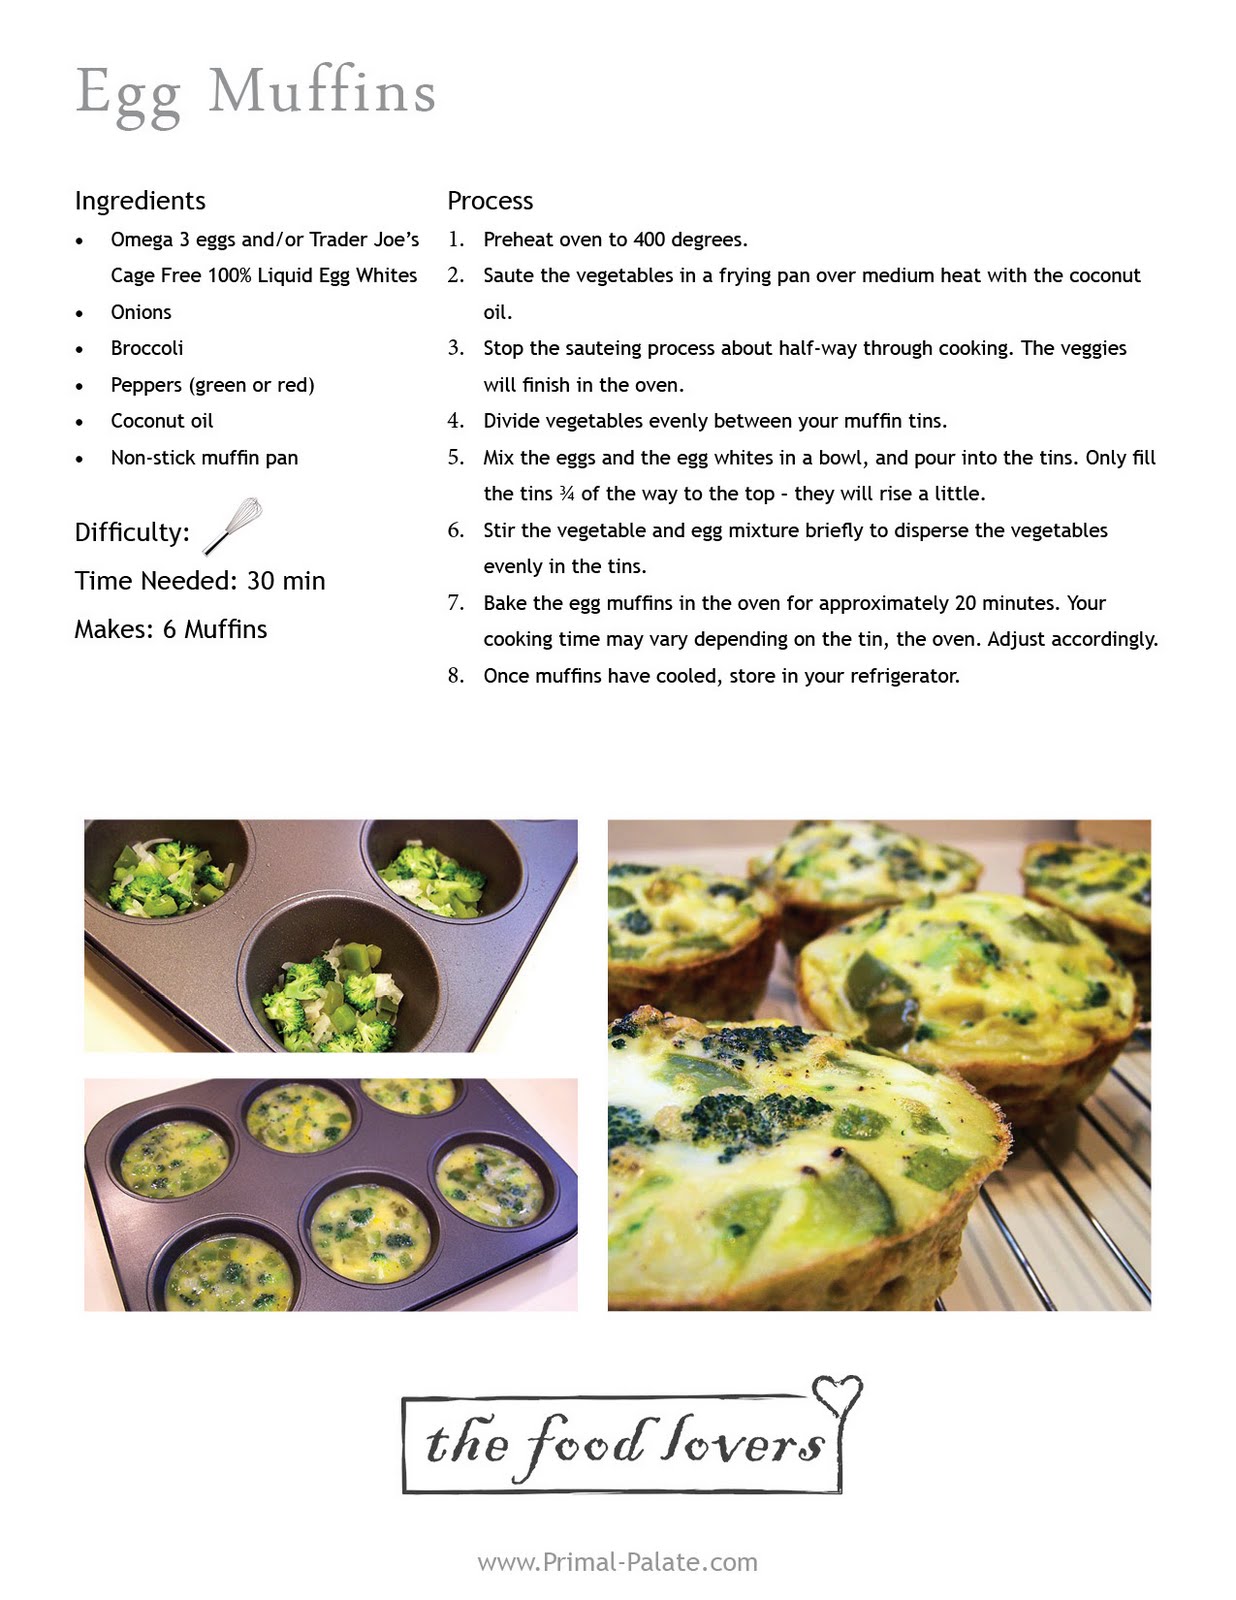 Breakfast on-the-go: Egg Muffins - Primal Palate | Paleo ...